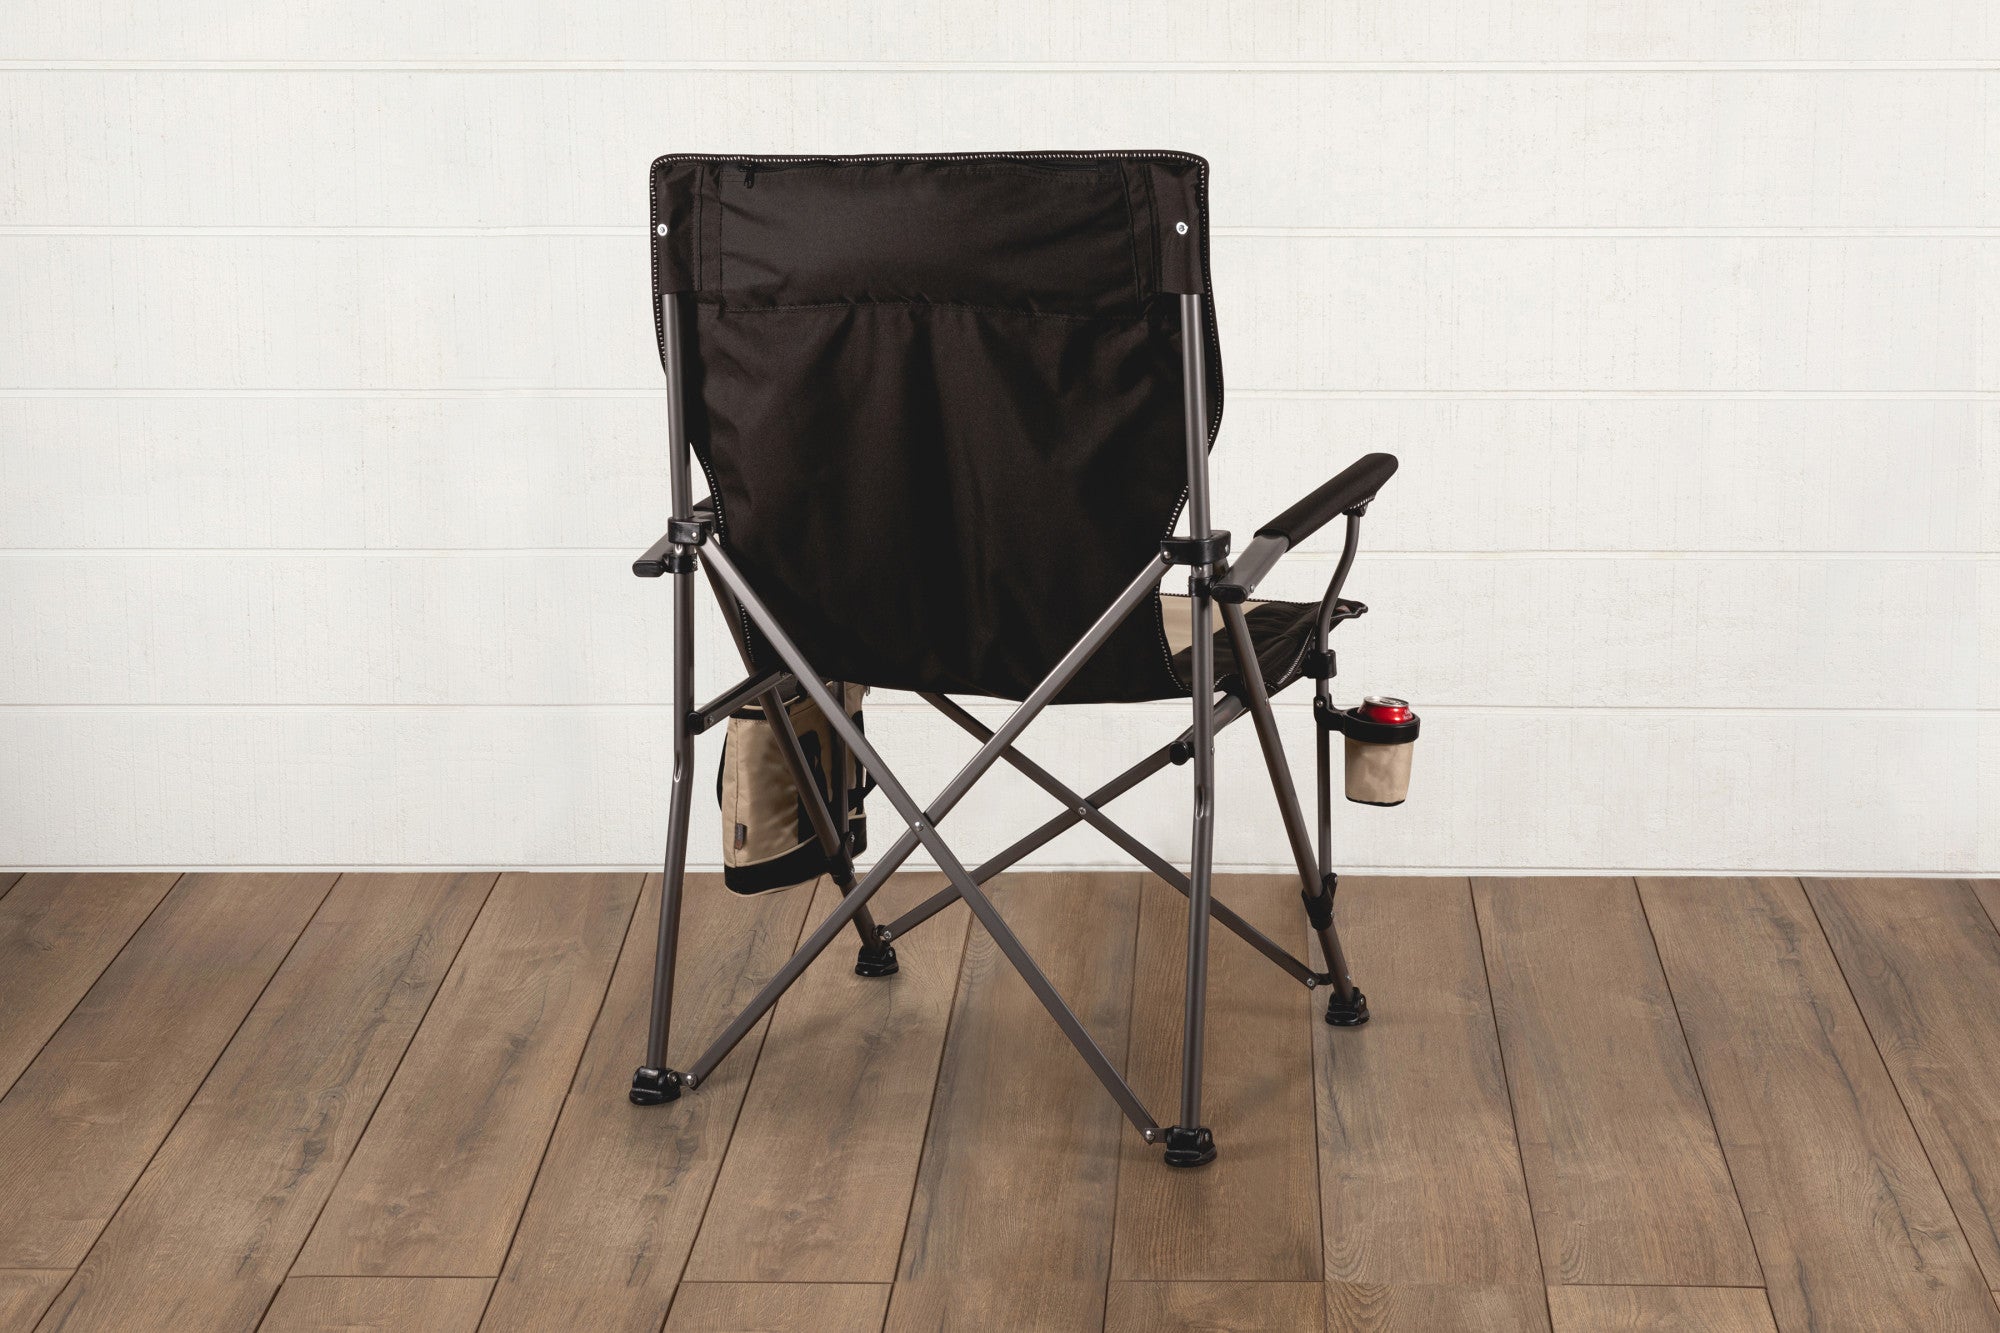 Stanford Cardinal - Big Bear XXL Camping Chair with Cooler